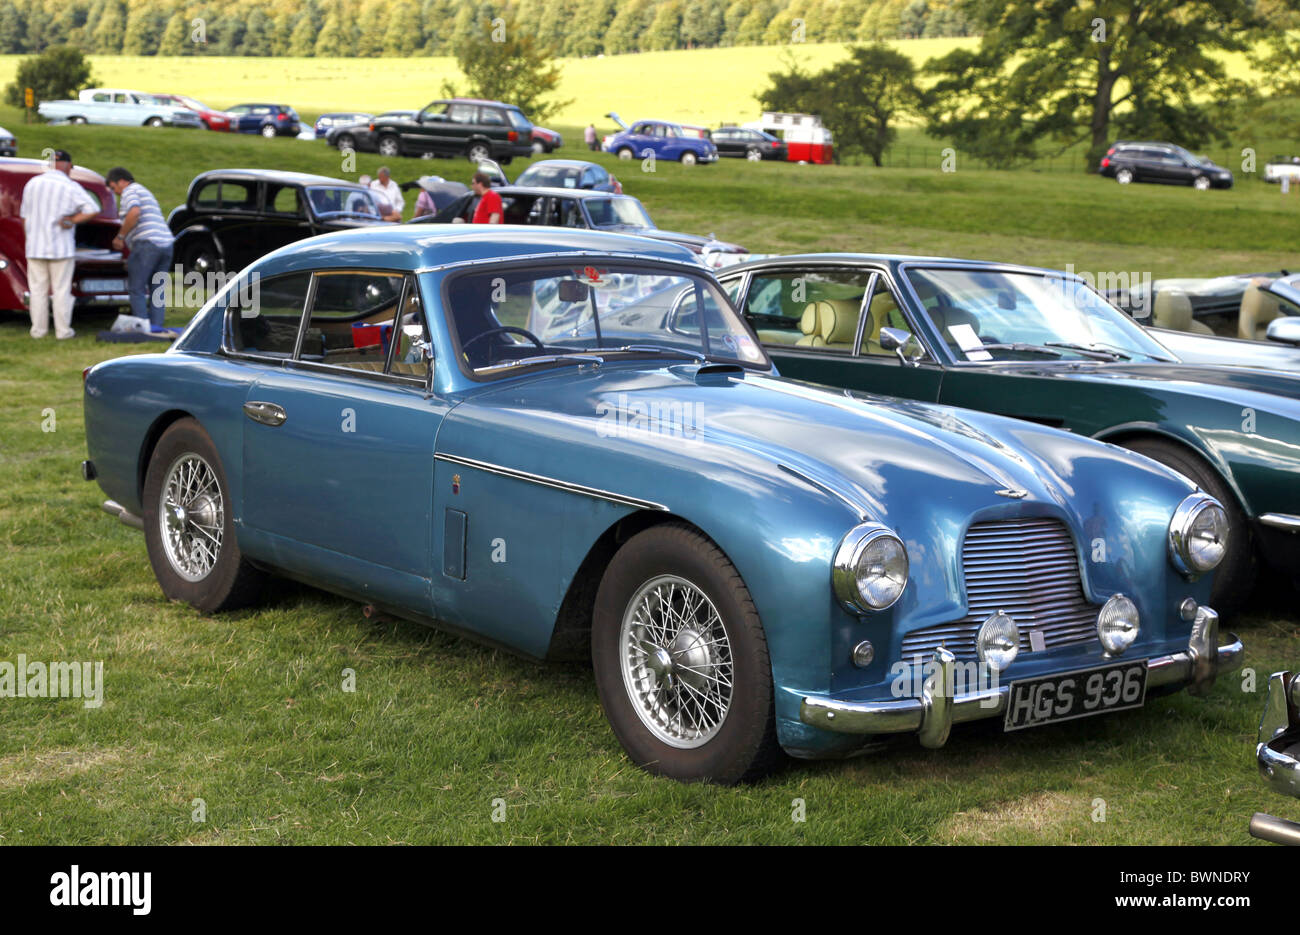 ASTON MARTIN DB2 CLASSIC CAR STAINDROP YORKSHIRE RABY CASTLE STAINDROP NORTH YORKSHIRE STAINDROP NORTH YORKSHIRE 22 August 20 Stock Photo